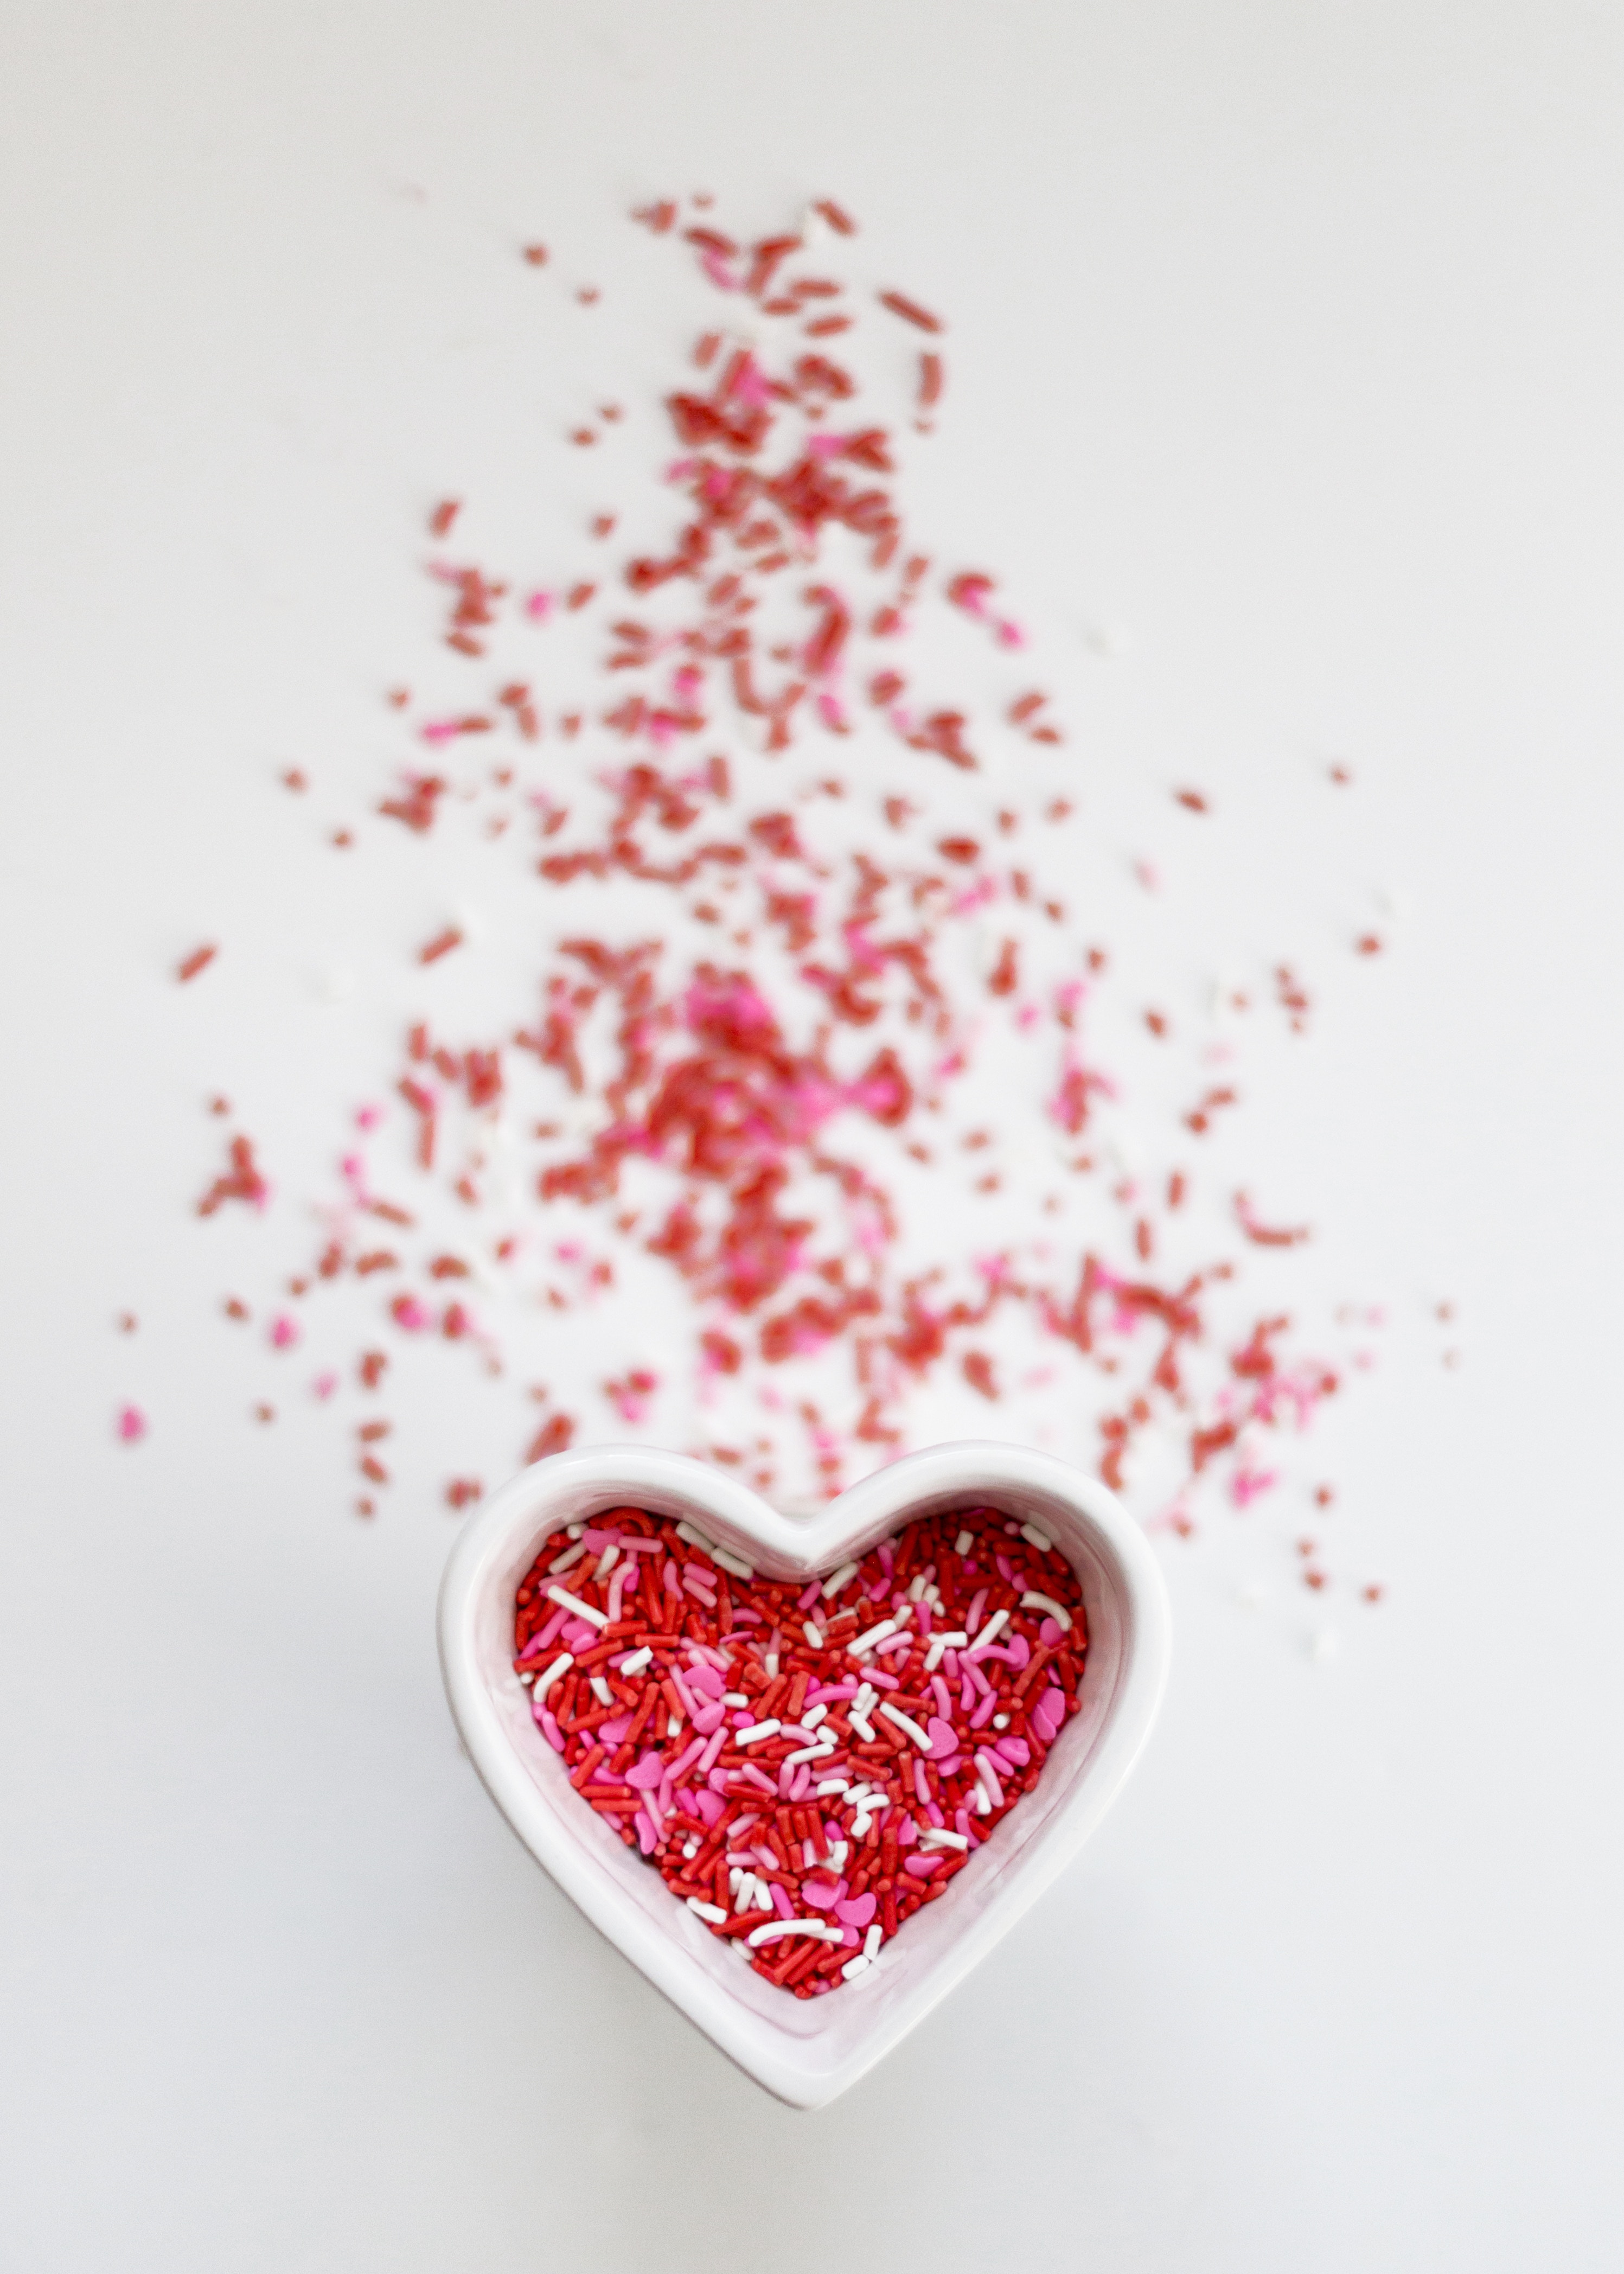 Heart shaped dish with red sprinkles for Valentine's Day